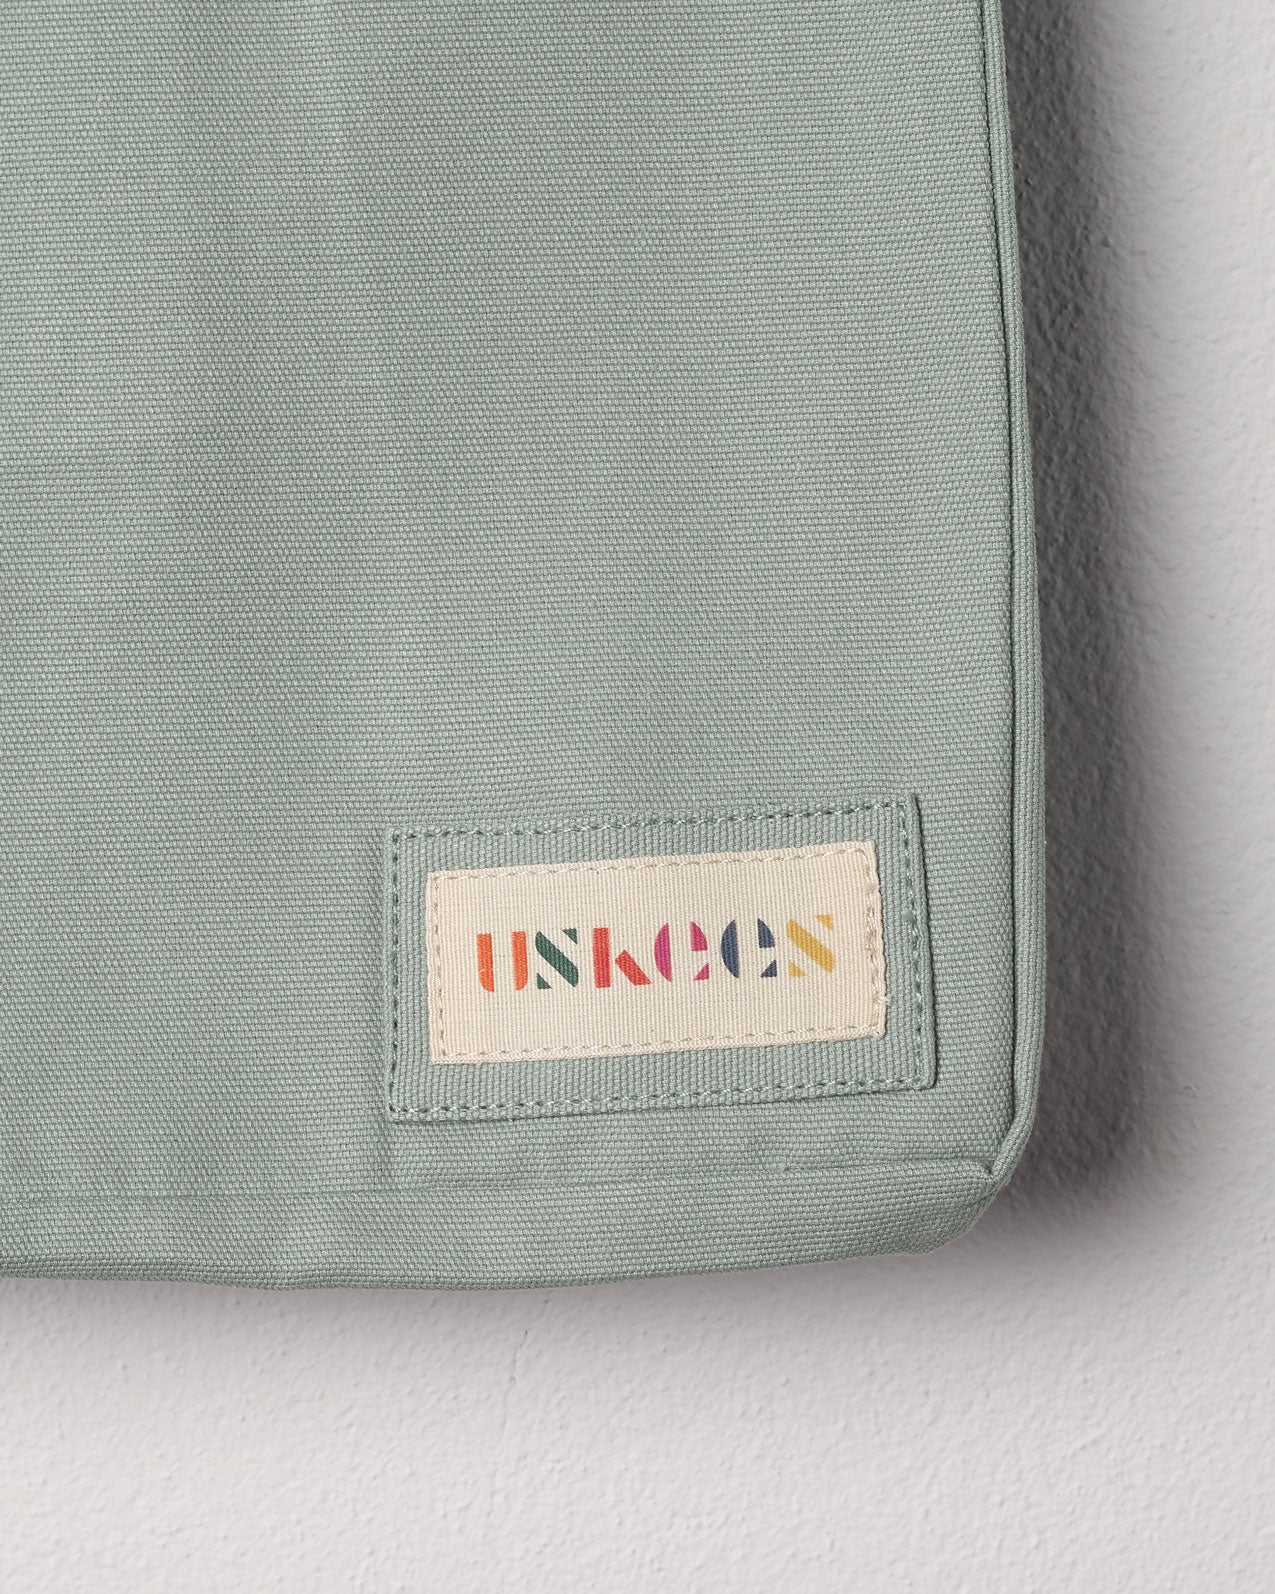 Close-up view of Uskees #4002 small tote bag in jade green showing the Uskees woven label.